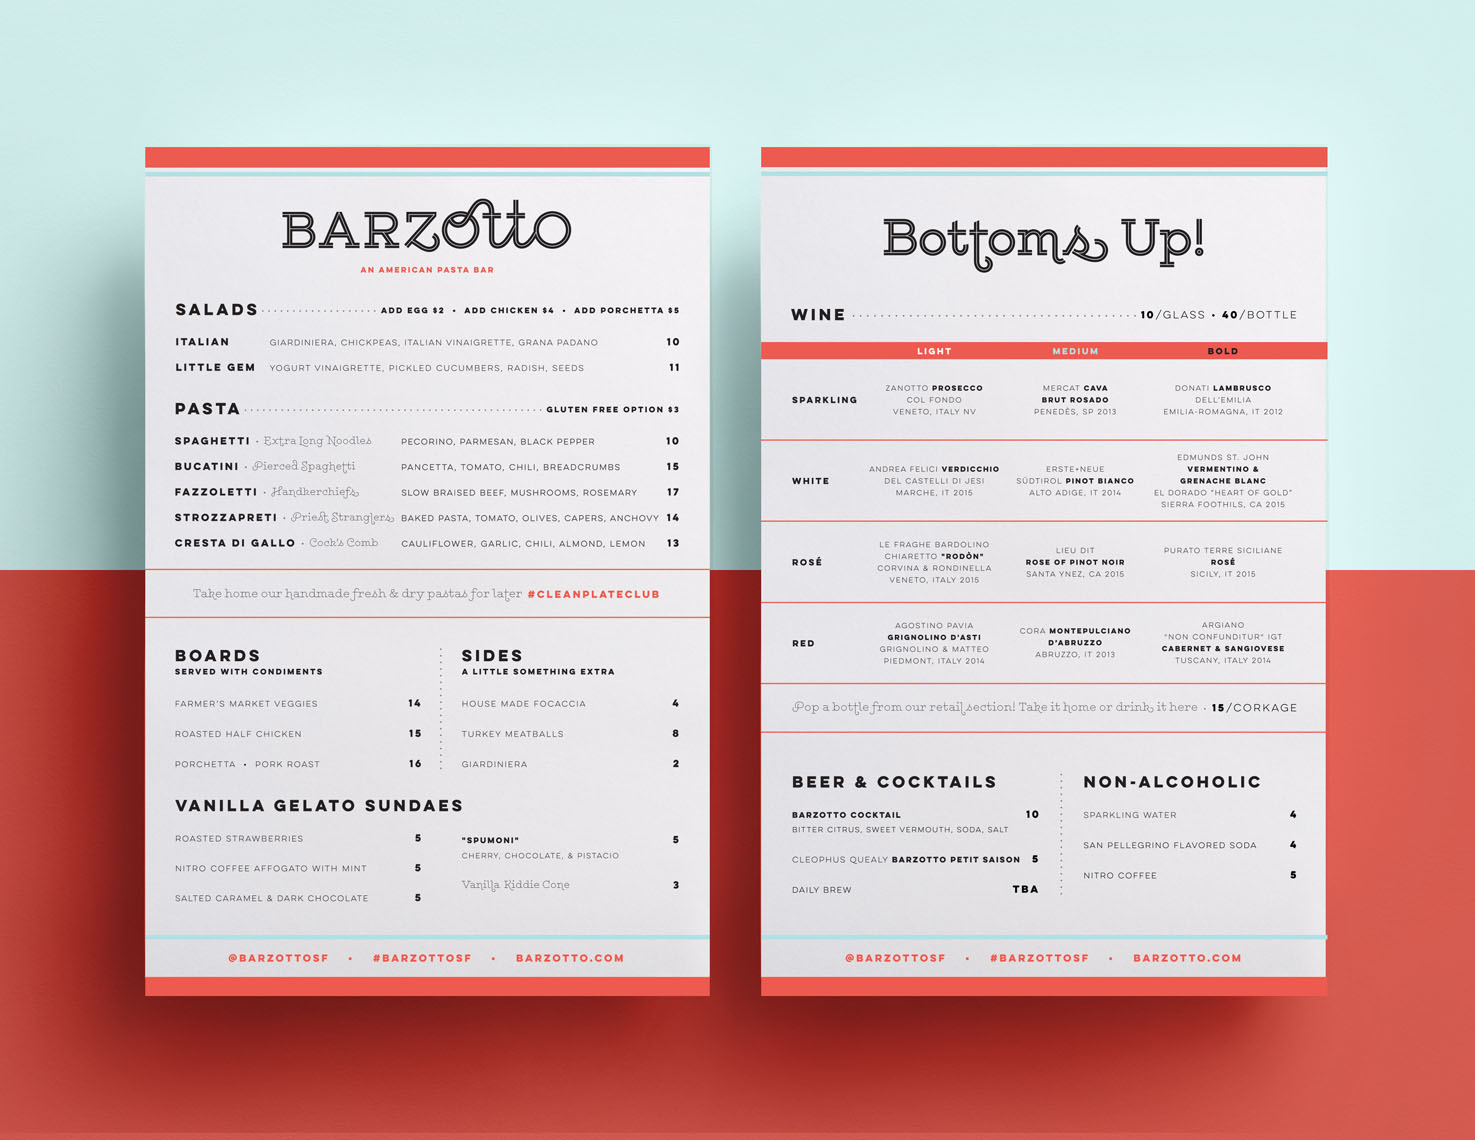 Graphic design work from DANIELLE MOORE for Barzotto.